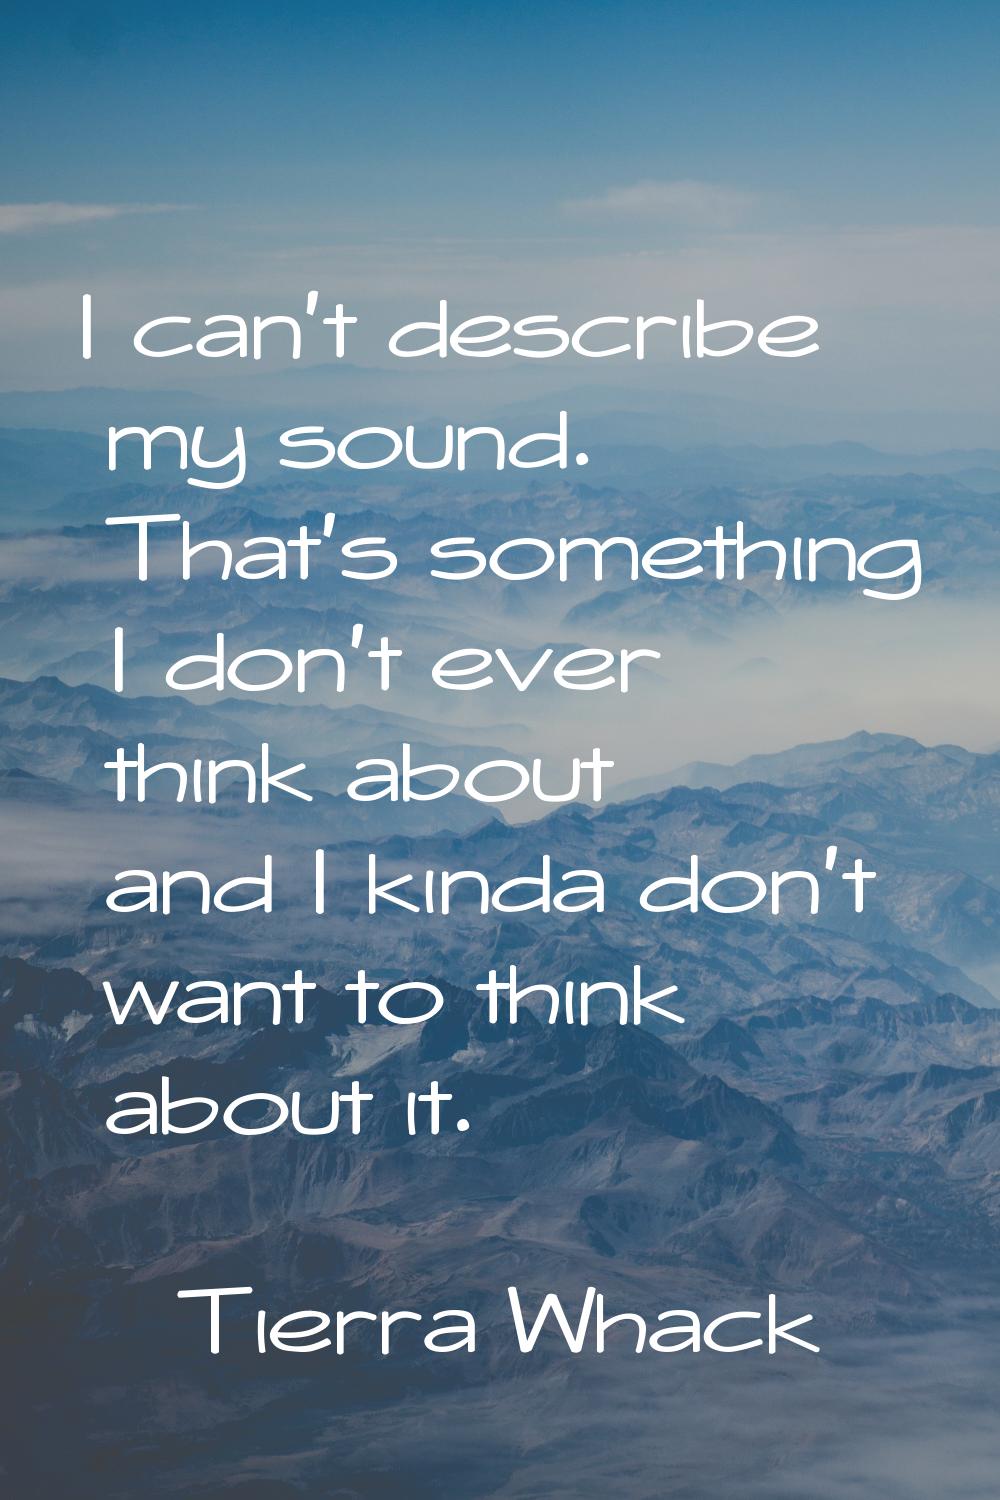 I can't describe my sound. That's something I don't ever think about and I kinda don't want to thin